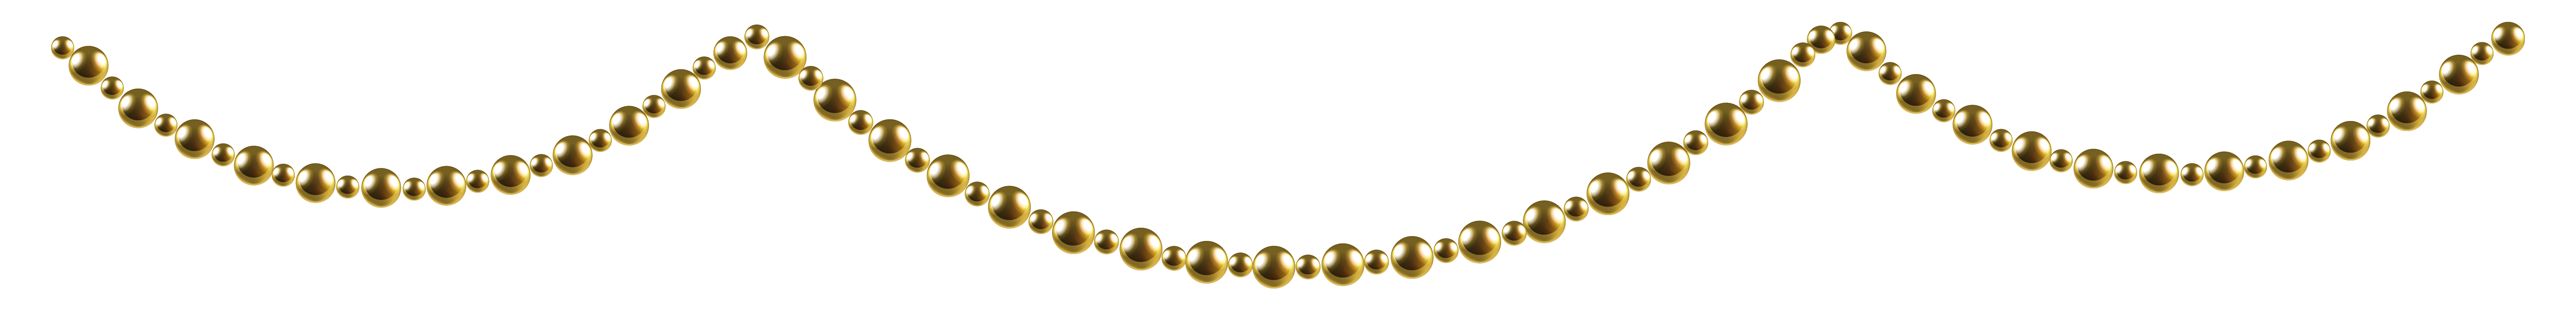 Garland clipart pearl. Gold png clip art